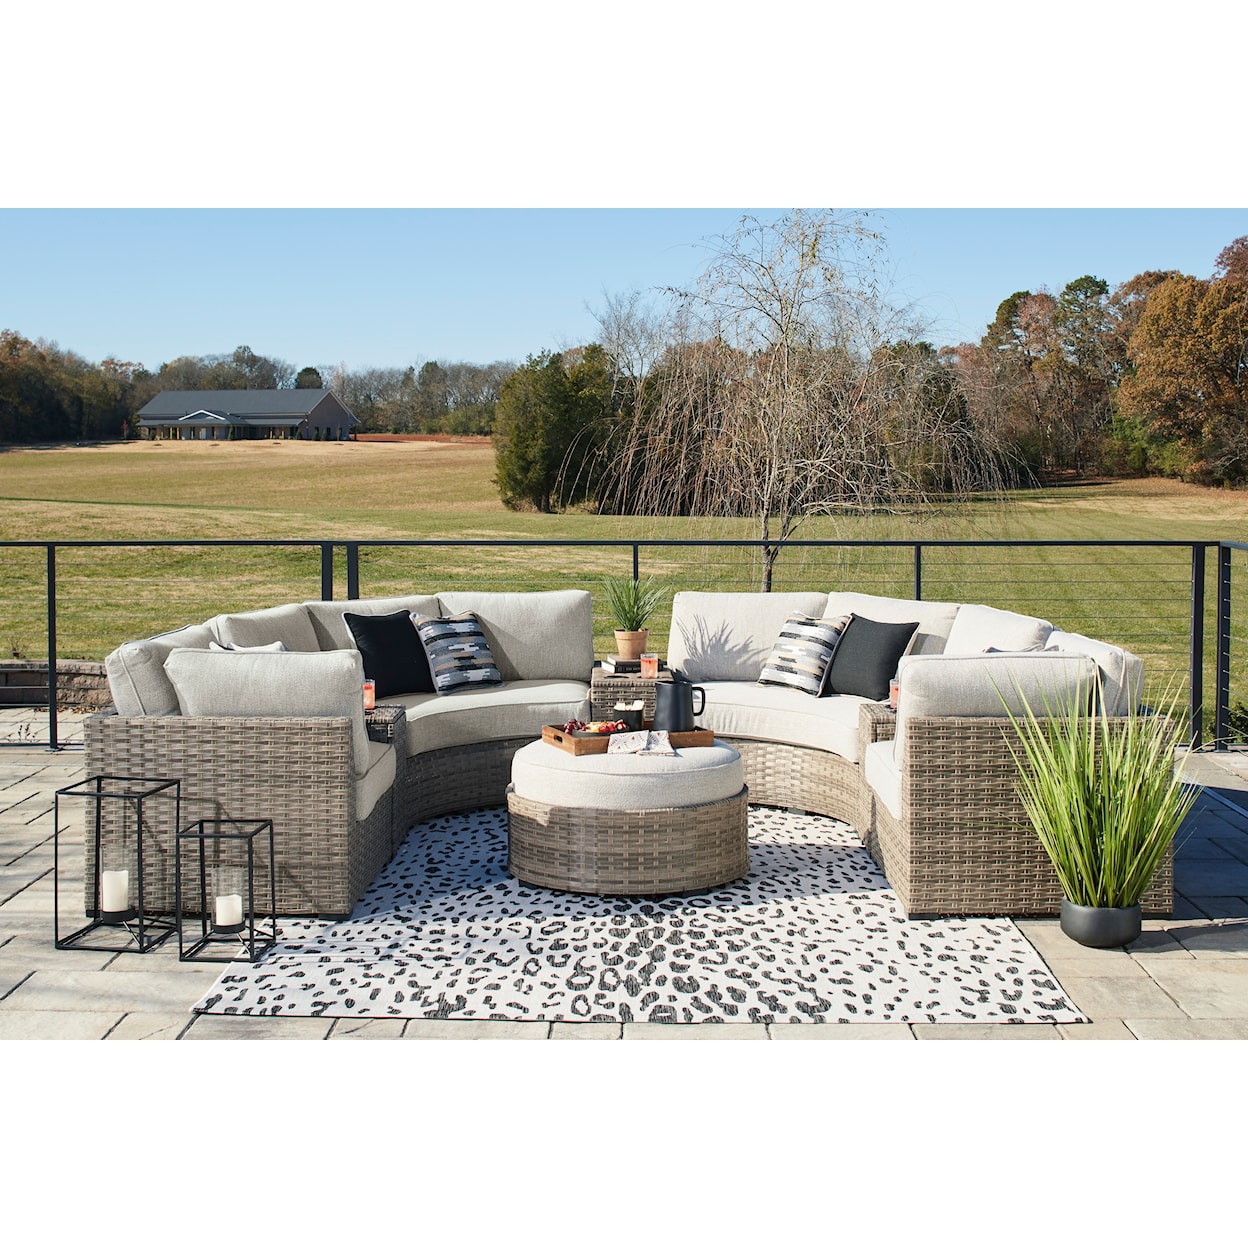 Ashley Furniture Signature Design Calworth 7-Piece Outdoor Sectional